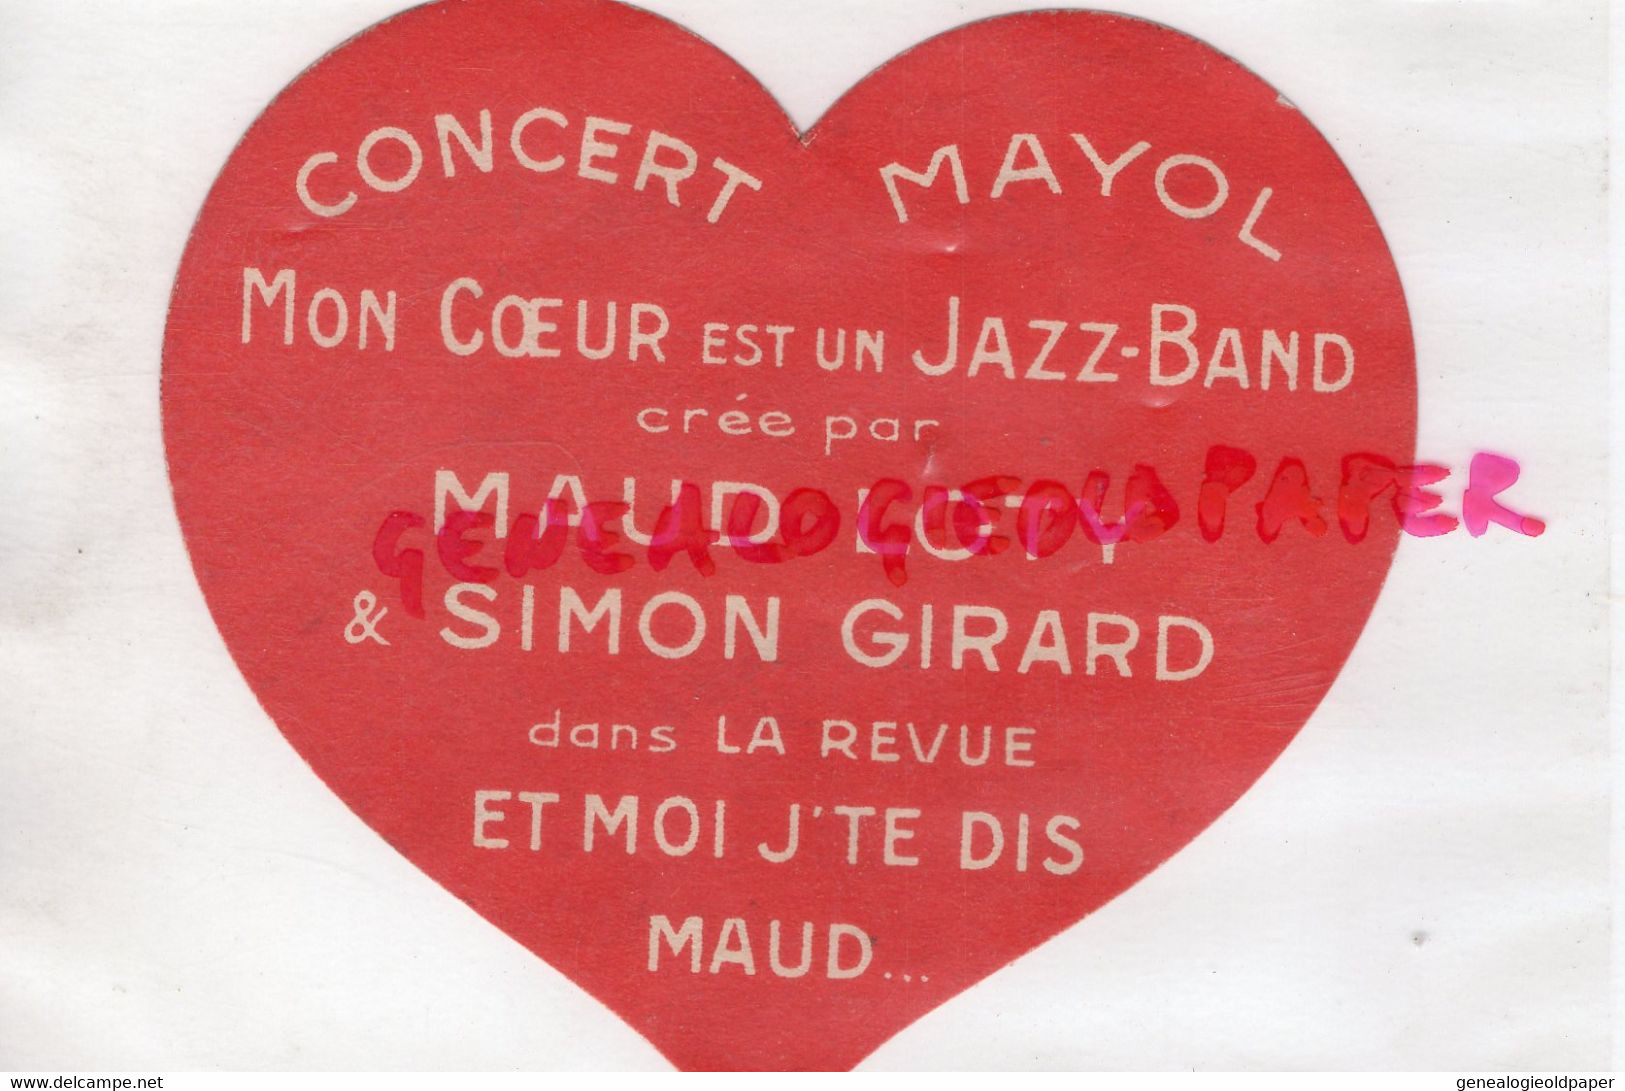 75- PARIS- COEUR CONCERT MAYOL-JAZZ BAND-MAUD LOTY -SIMON GIRARD-CALVADOS VIEUX PERE MAGLOIRE - Historical Documents